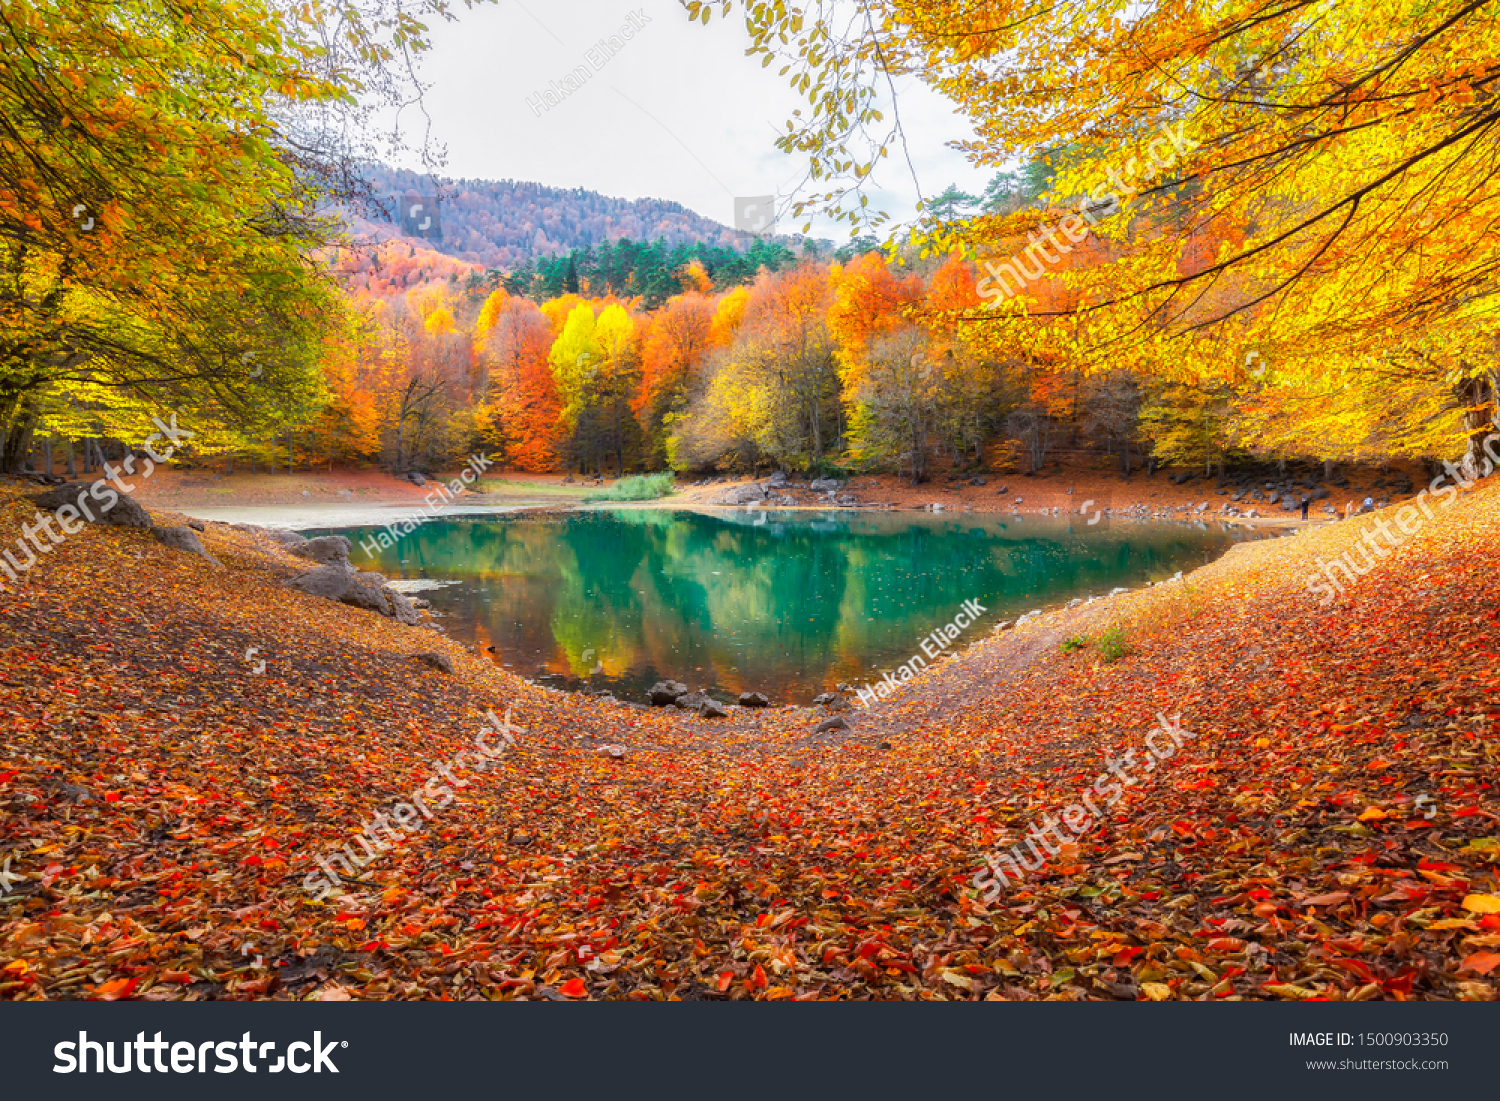 Autumn colors. Autumn time. Colorful fallen leaves in the lake. Magnificent landscape. Yedigoller National Park. Bolu, Istanbul, Turkey. #1500903350